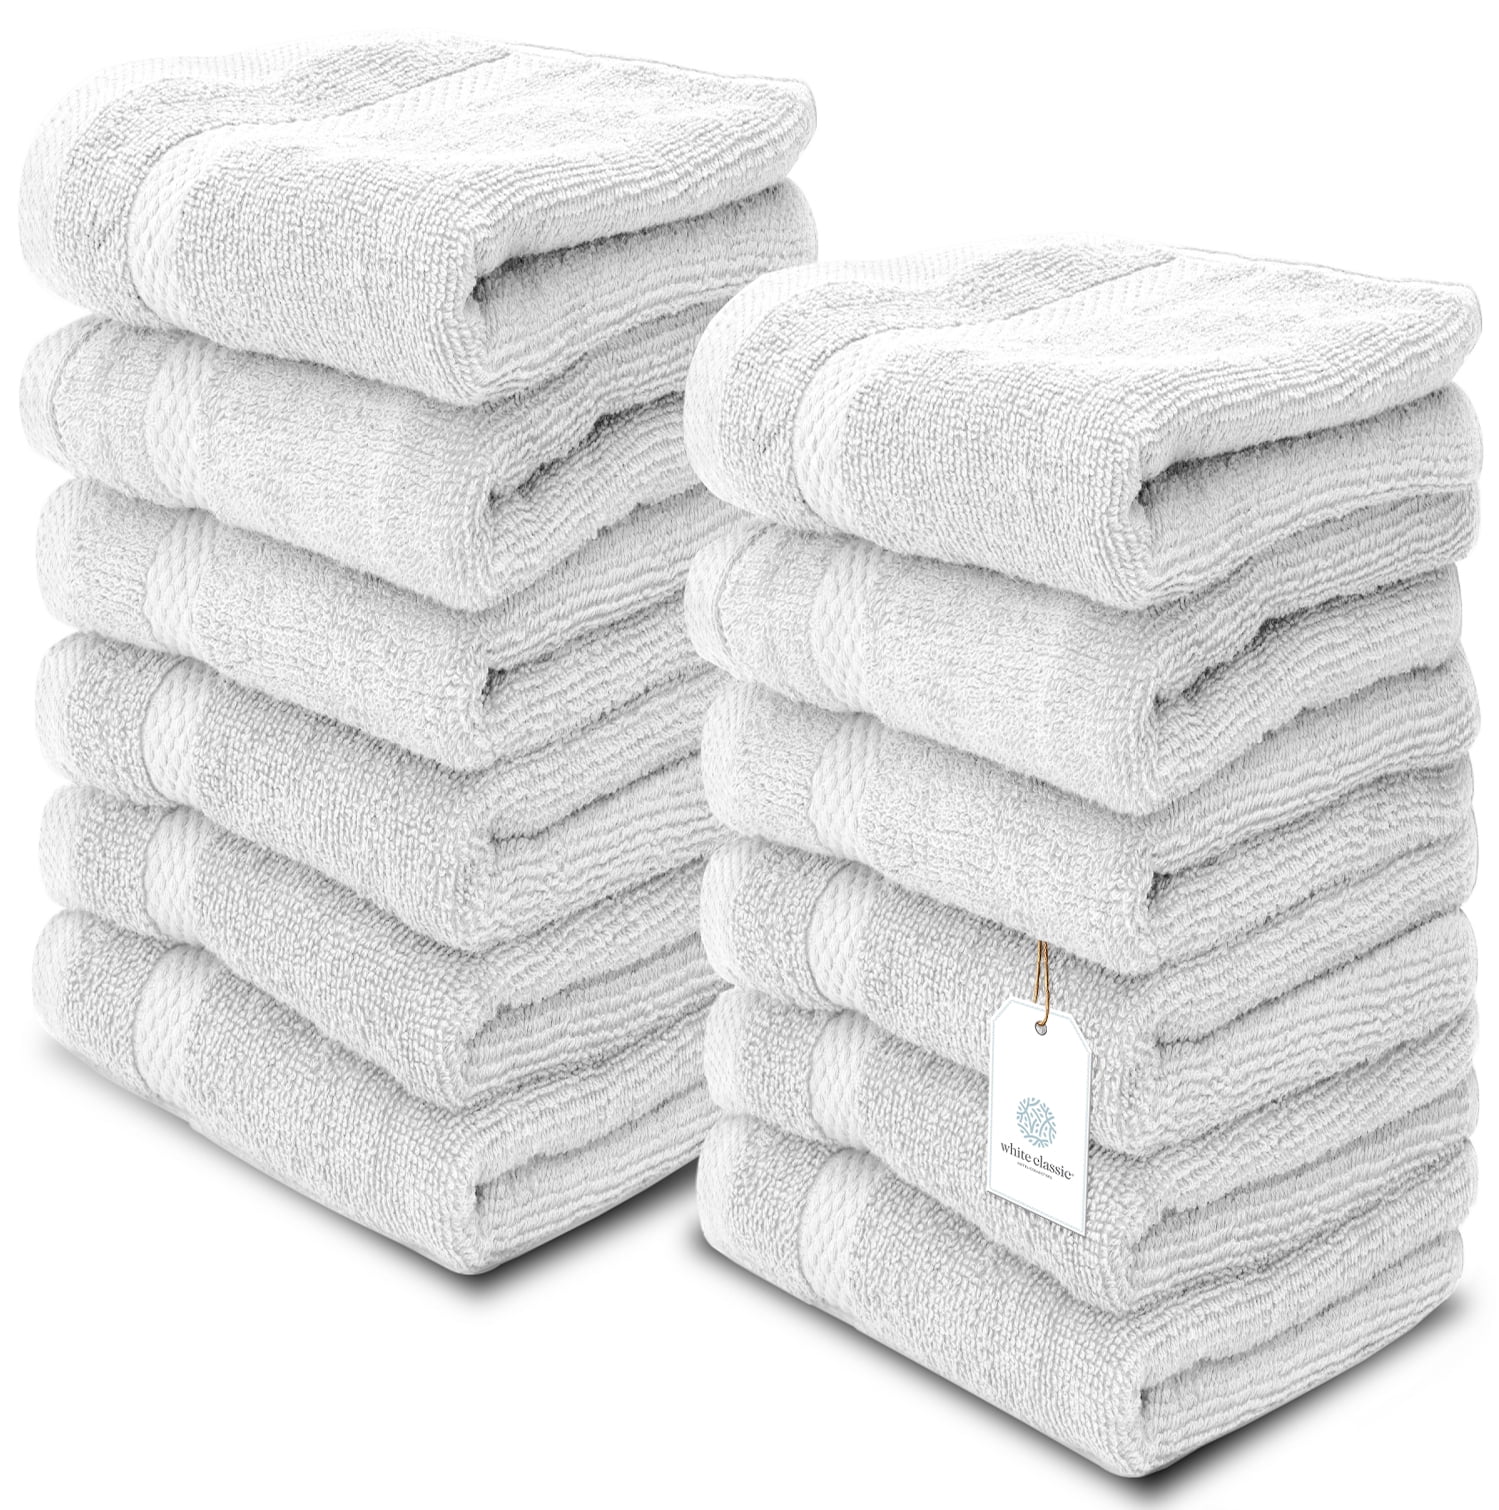 Details about   WhiteClassic Luxury Cotton Washcloths 13x13 Hotel Face TowelBrown 12/Pack 